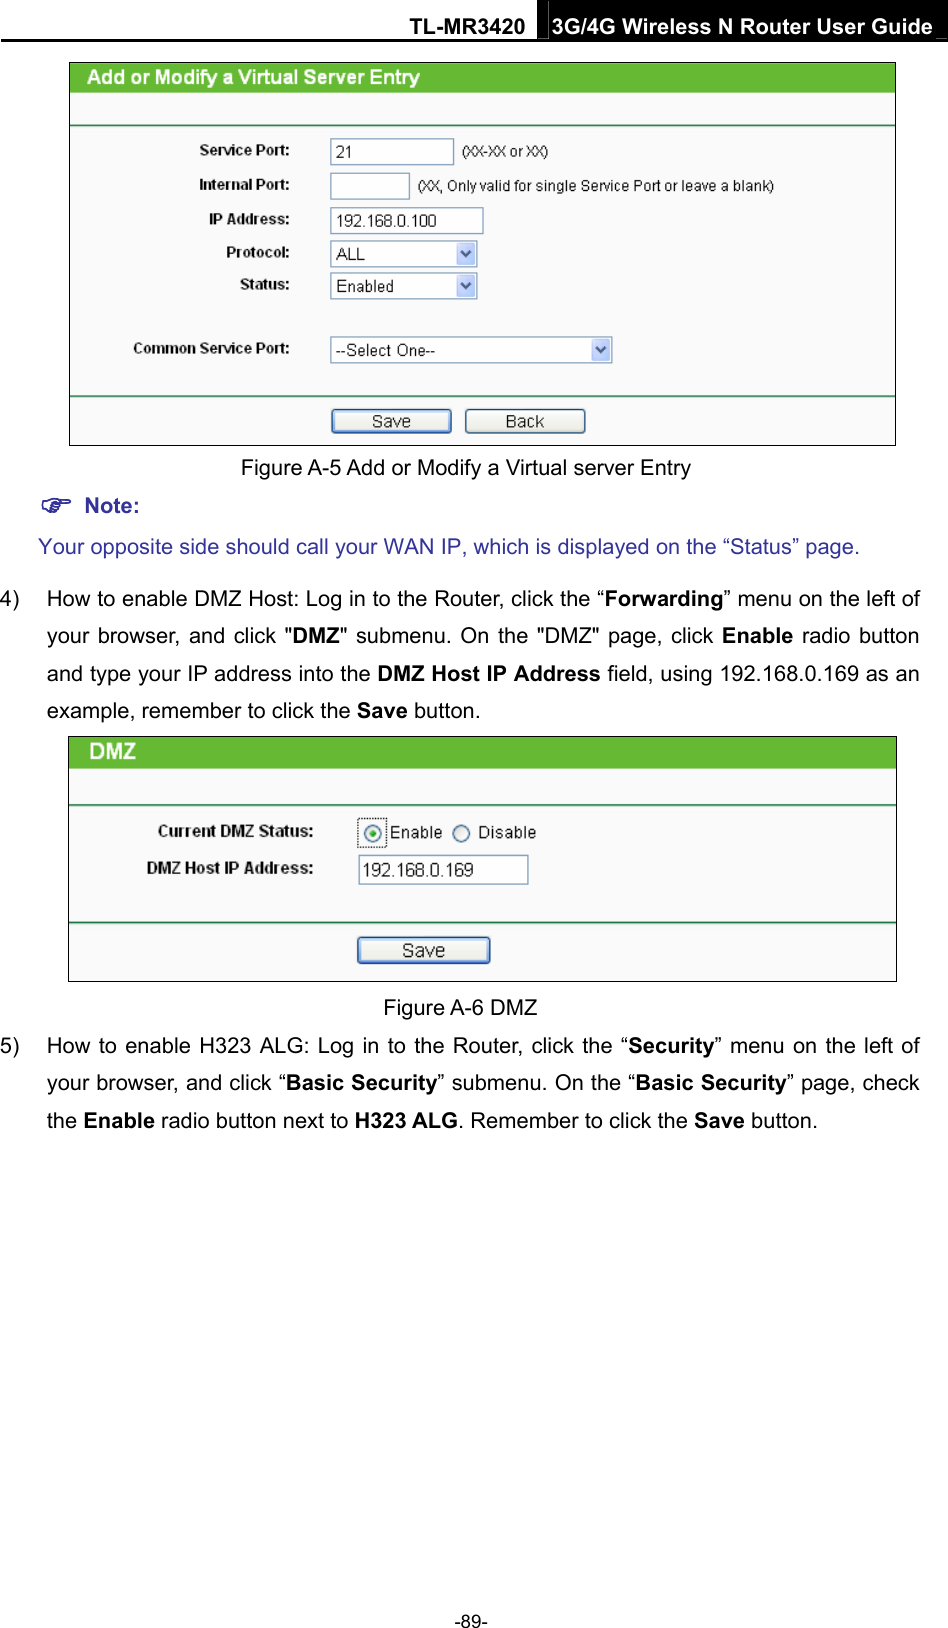 TL-MR3420 3G/4G Wireless N Router User Guide    Figure A-5 Add or Modify a Virtual server Entry  Note: Your opposite side should call your WAN IP, which is displayed on the “Status” page. 4)  How to enable DMZ Host: Log in to the Router, click the “Forwarding” menu on the left of your browser, and click &quot;DMZ&quot; submenu. On the &quot;DMZ&quot; page, click Enable radio button and type your IP address into the DMZ Host IP Address field, using 192.168.0.169 as an example, remember to click the Save button.    Figure A-6 DMZ 5)  How to enable H323 ALG: Log in to the Router, click the “Security” menu on the left of your browser, and click “Basic Security” submenu. On the “Basic Security” page, check the Enable radio button next to H323 ALG. Remember to click the Save button. -89- 